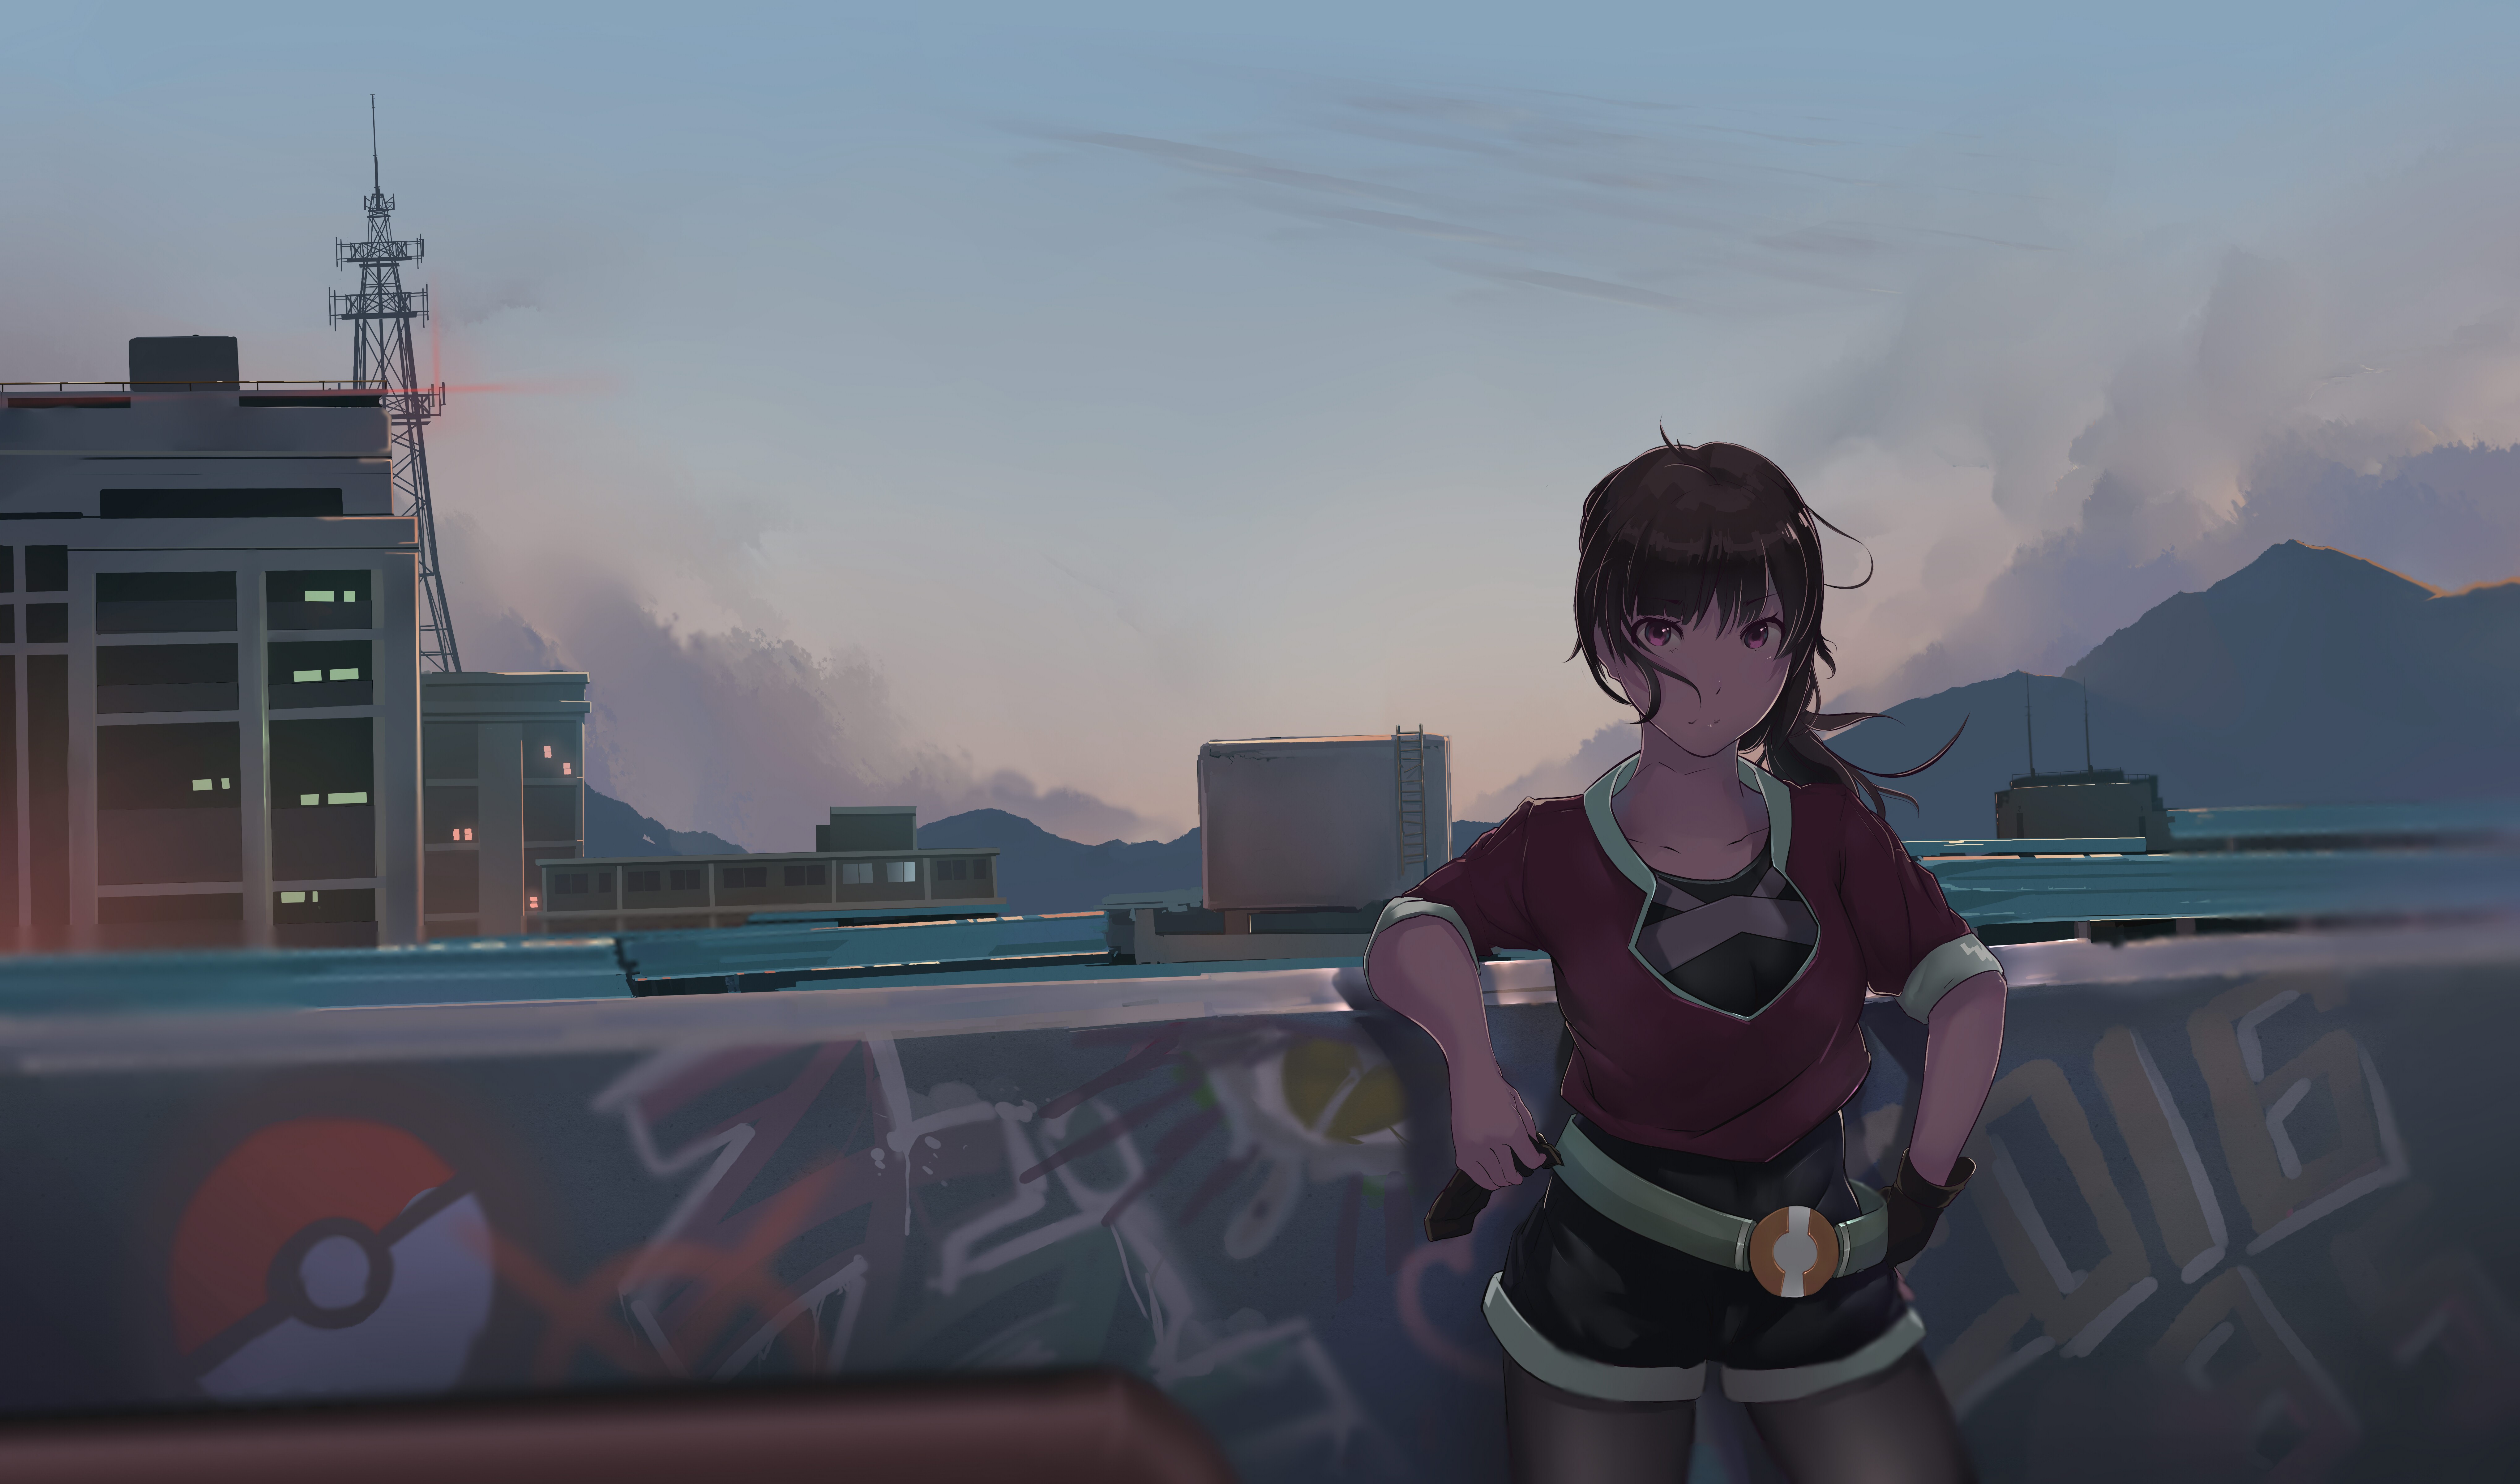 Anime 8149x4800 anime girls Pokémon Pokémon Go standing looking at viewer clouds collarbone gloves Poke Ball building sky closed mouth brunette purple eyes outdoors women outdoors graffiti